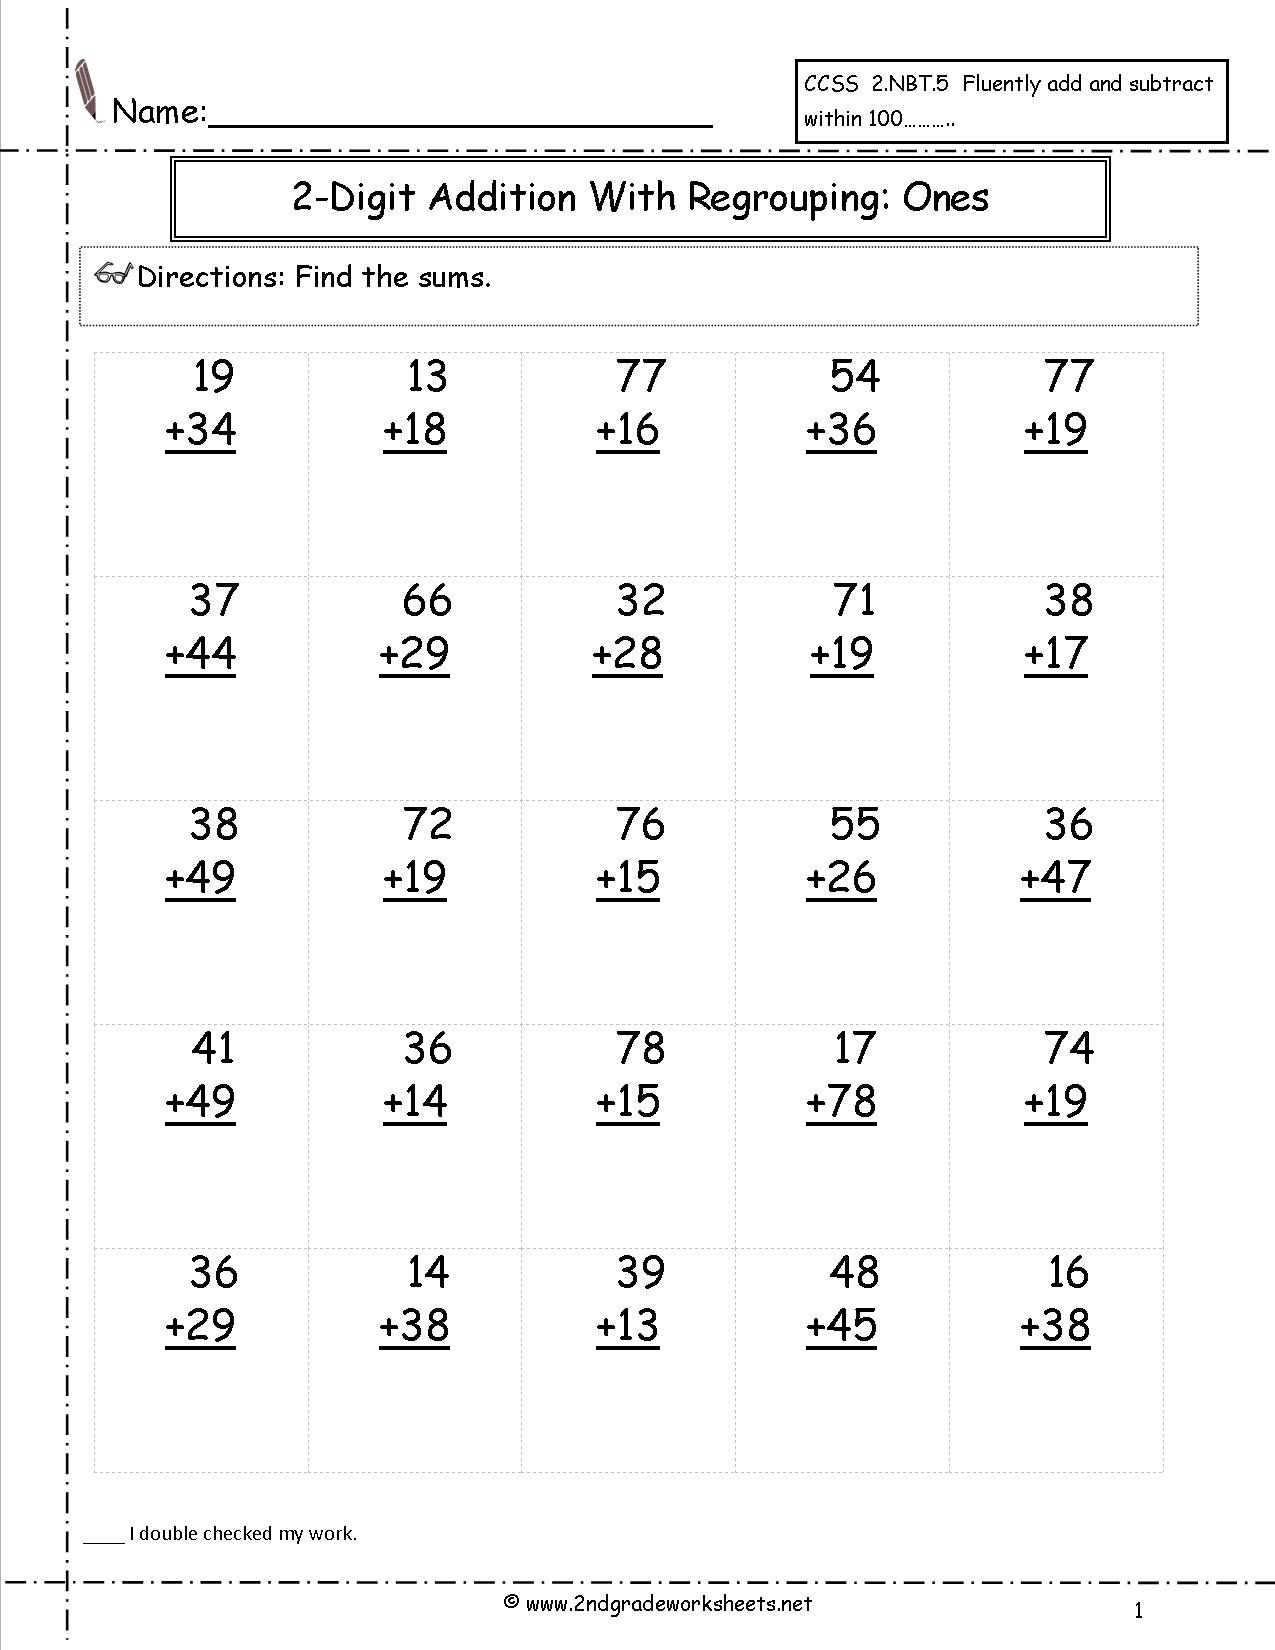 Free Math Worksheets And Printouts - Free Printable Subtraction Worksheets